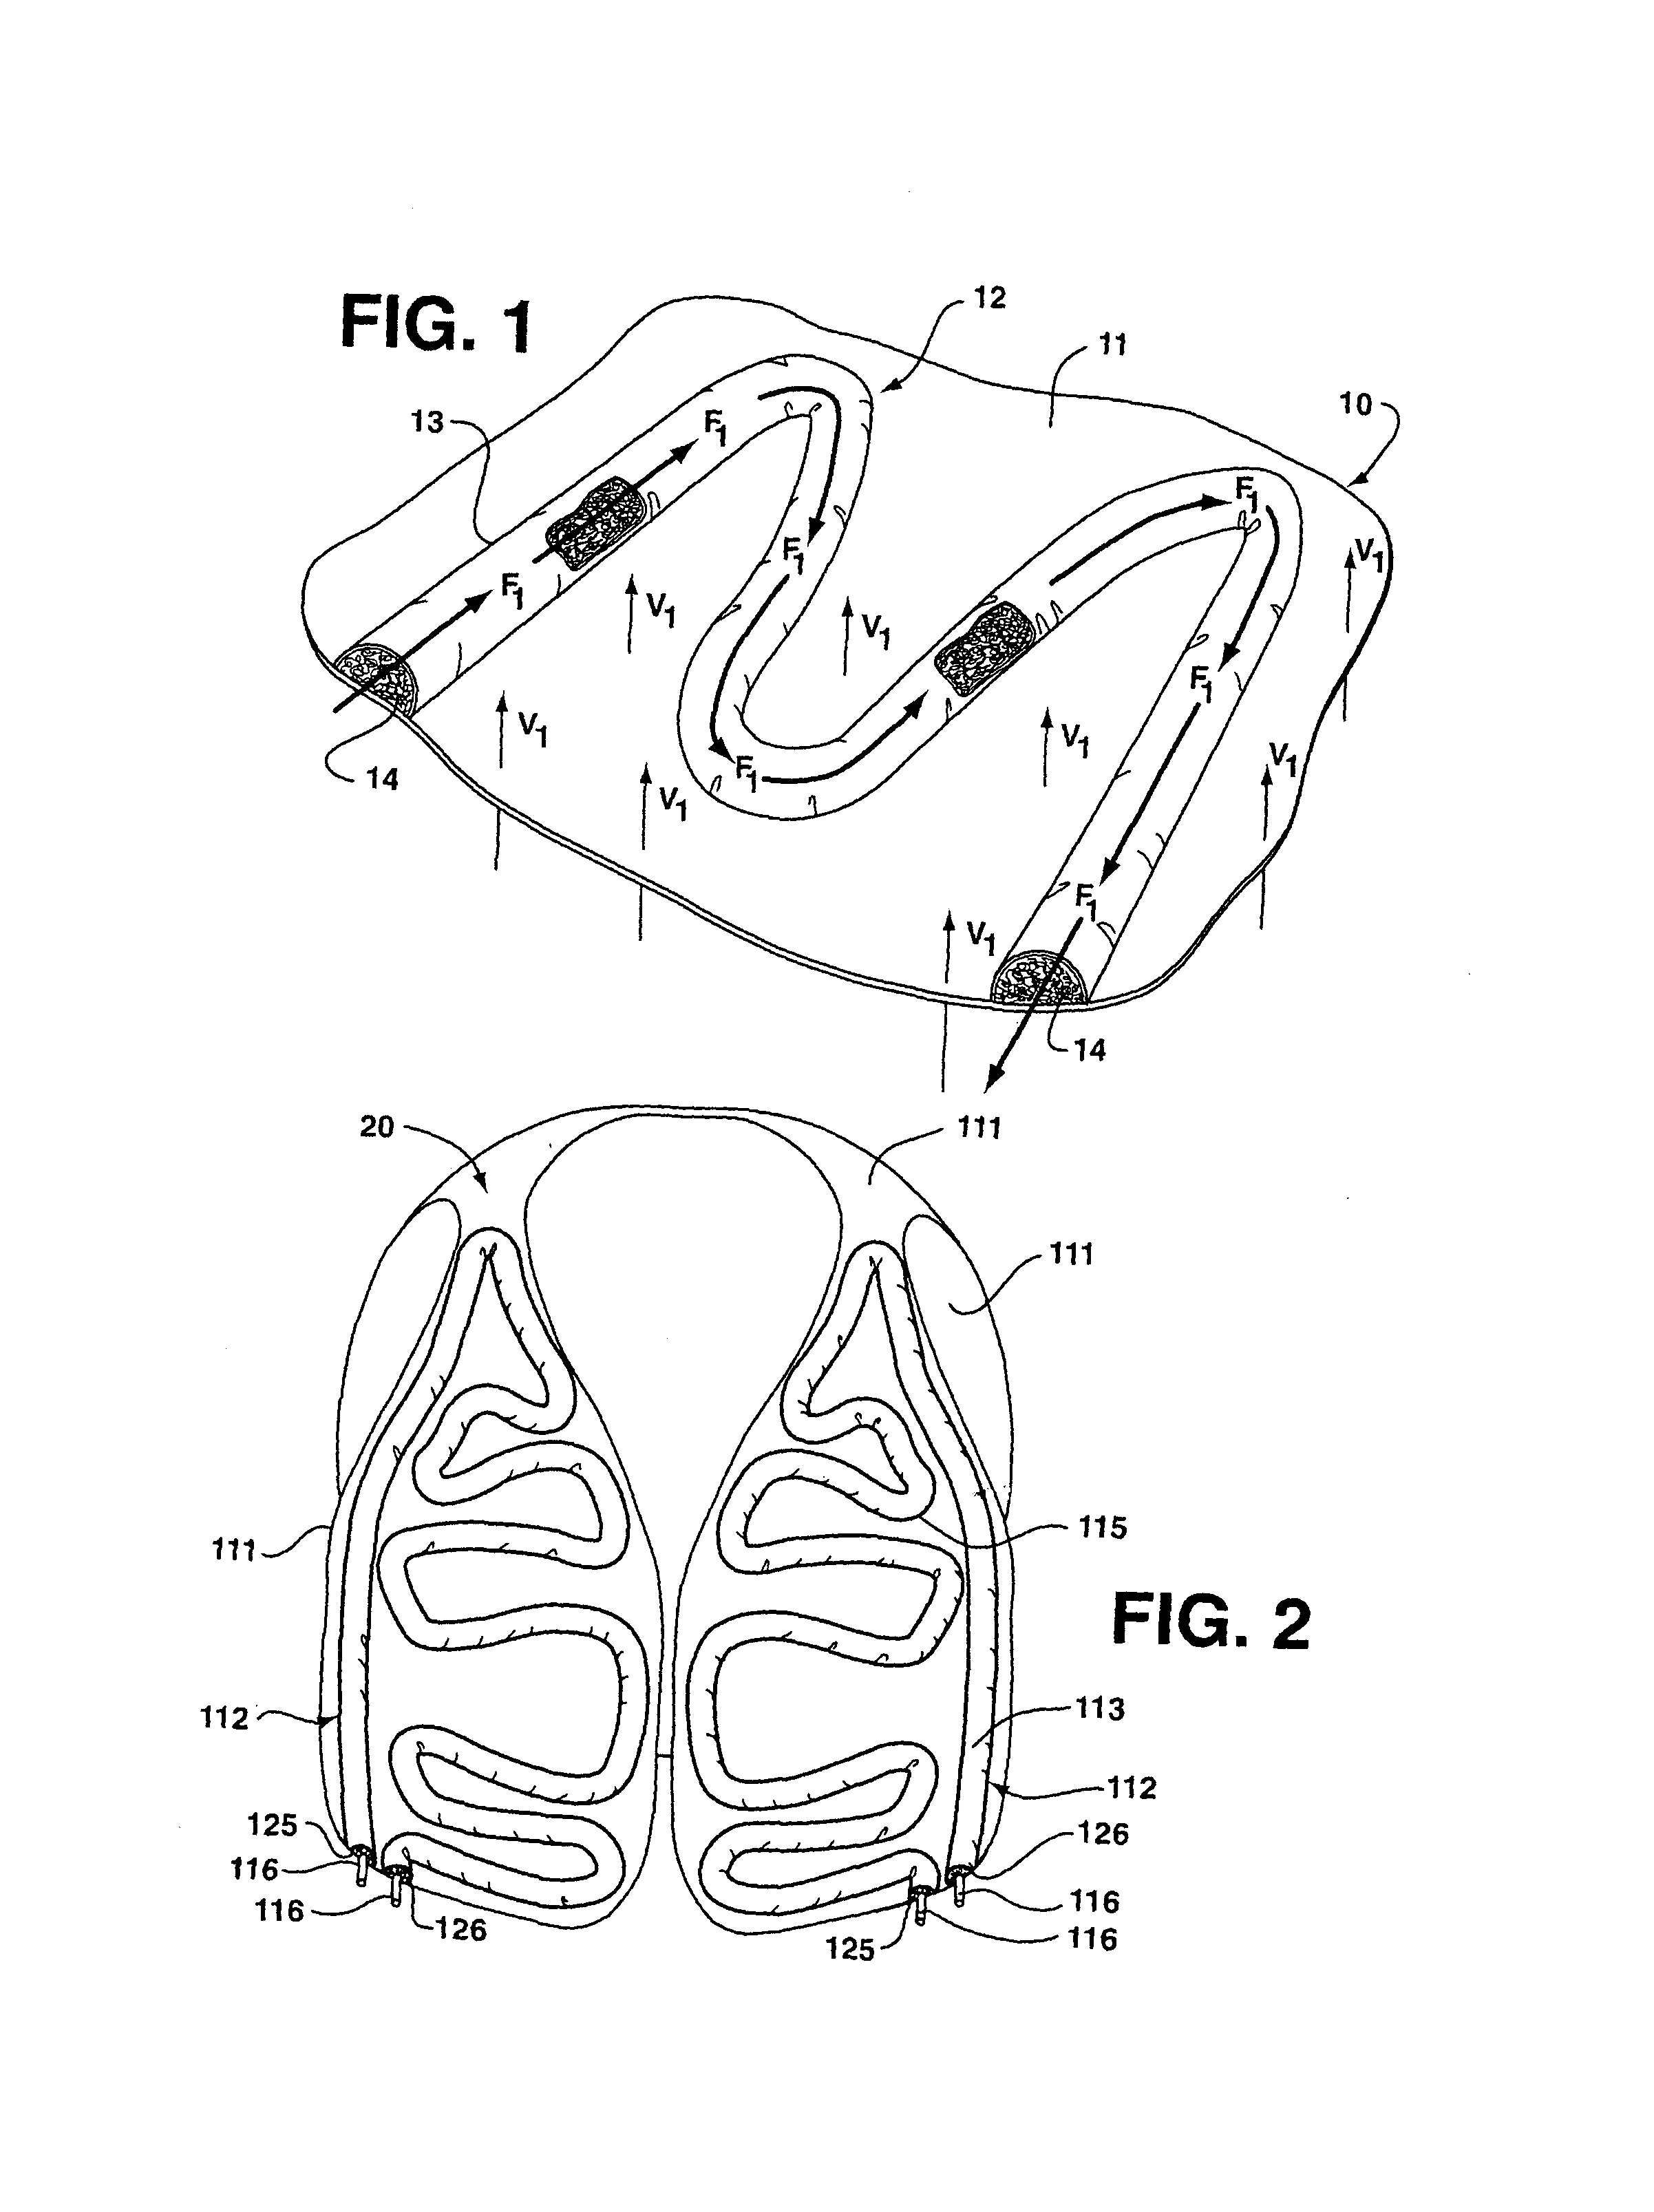 Microclimate regulating garment and composite structure